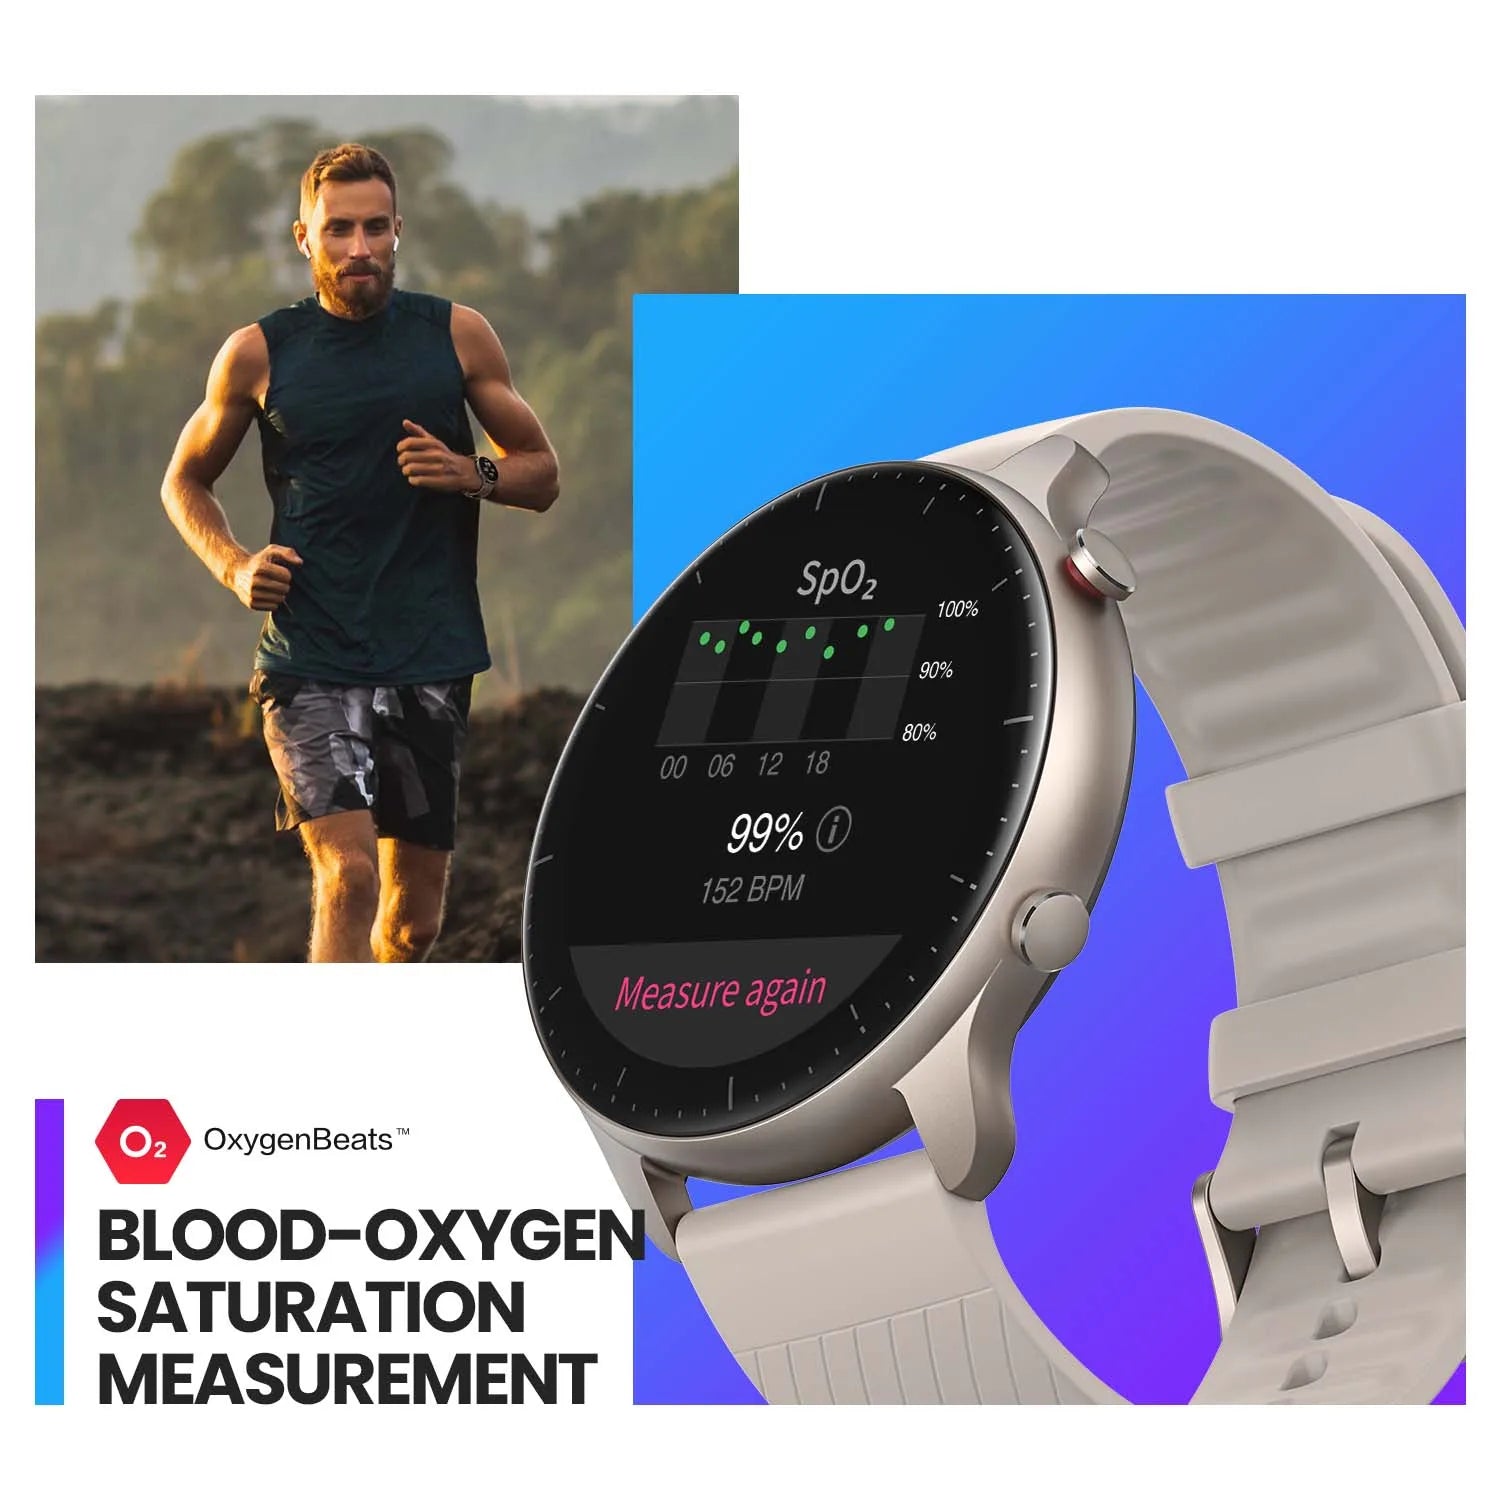 Amazfit GTR 2 New Version Smartwatch Alexa Built-in Ultra-long Battery Life Smart Watch For Android iOS Phone - Madeinsea©